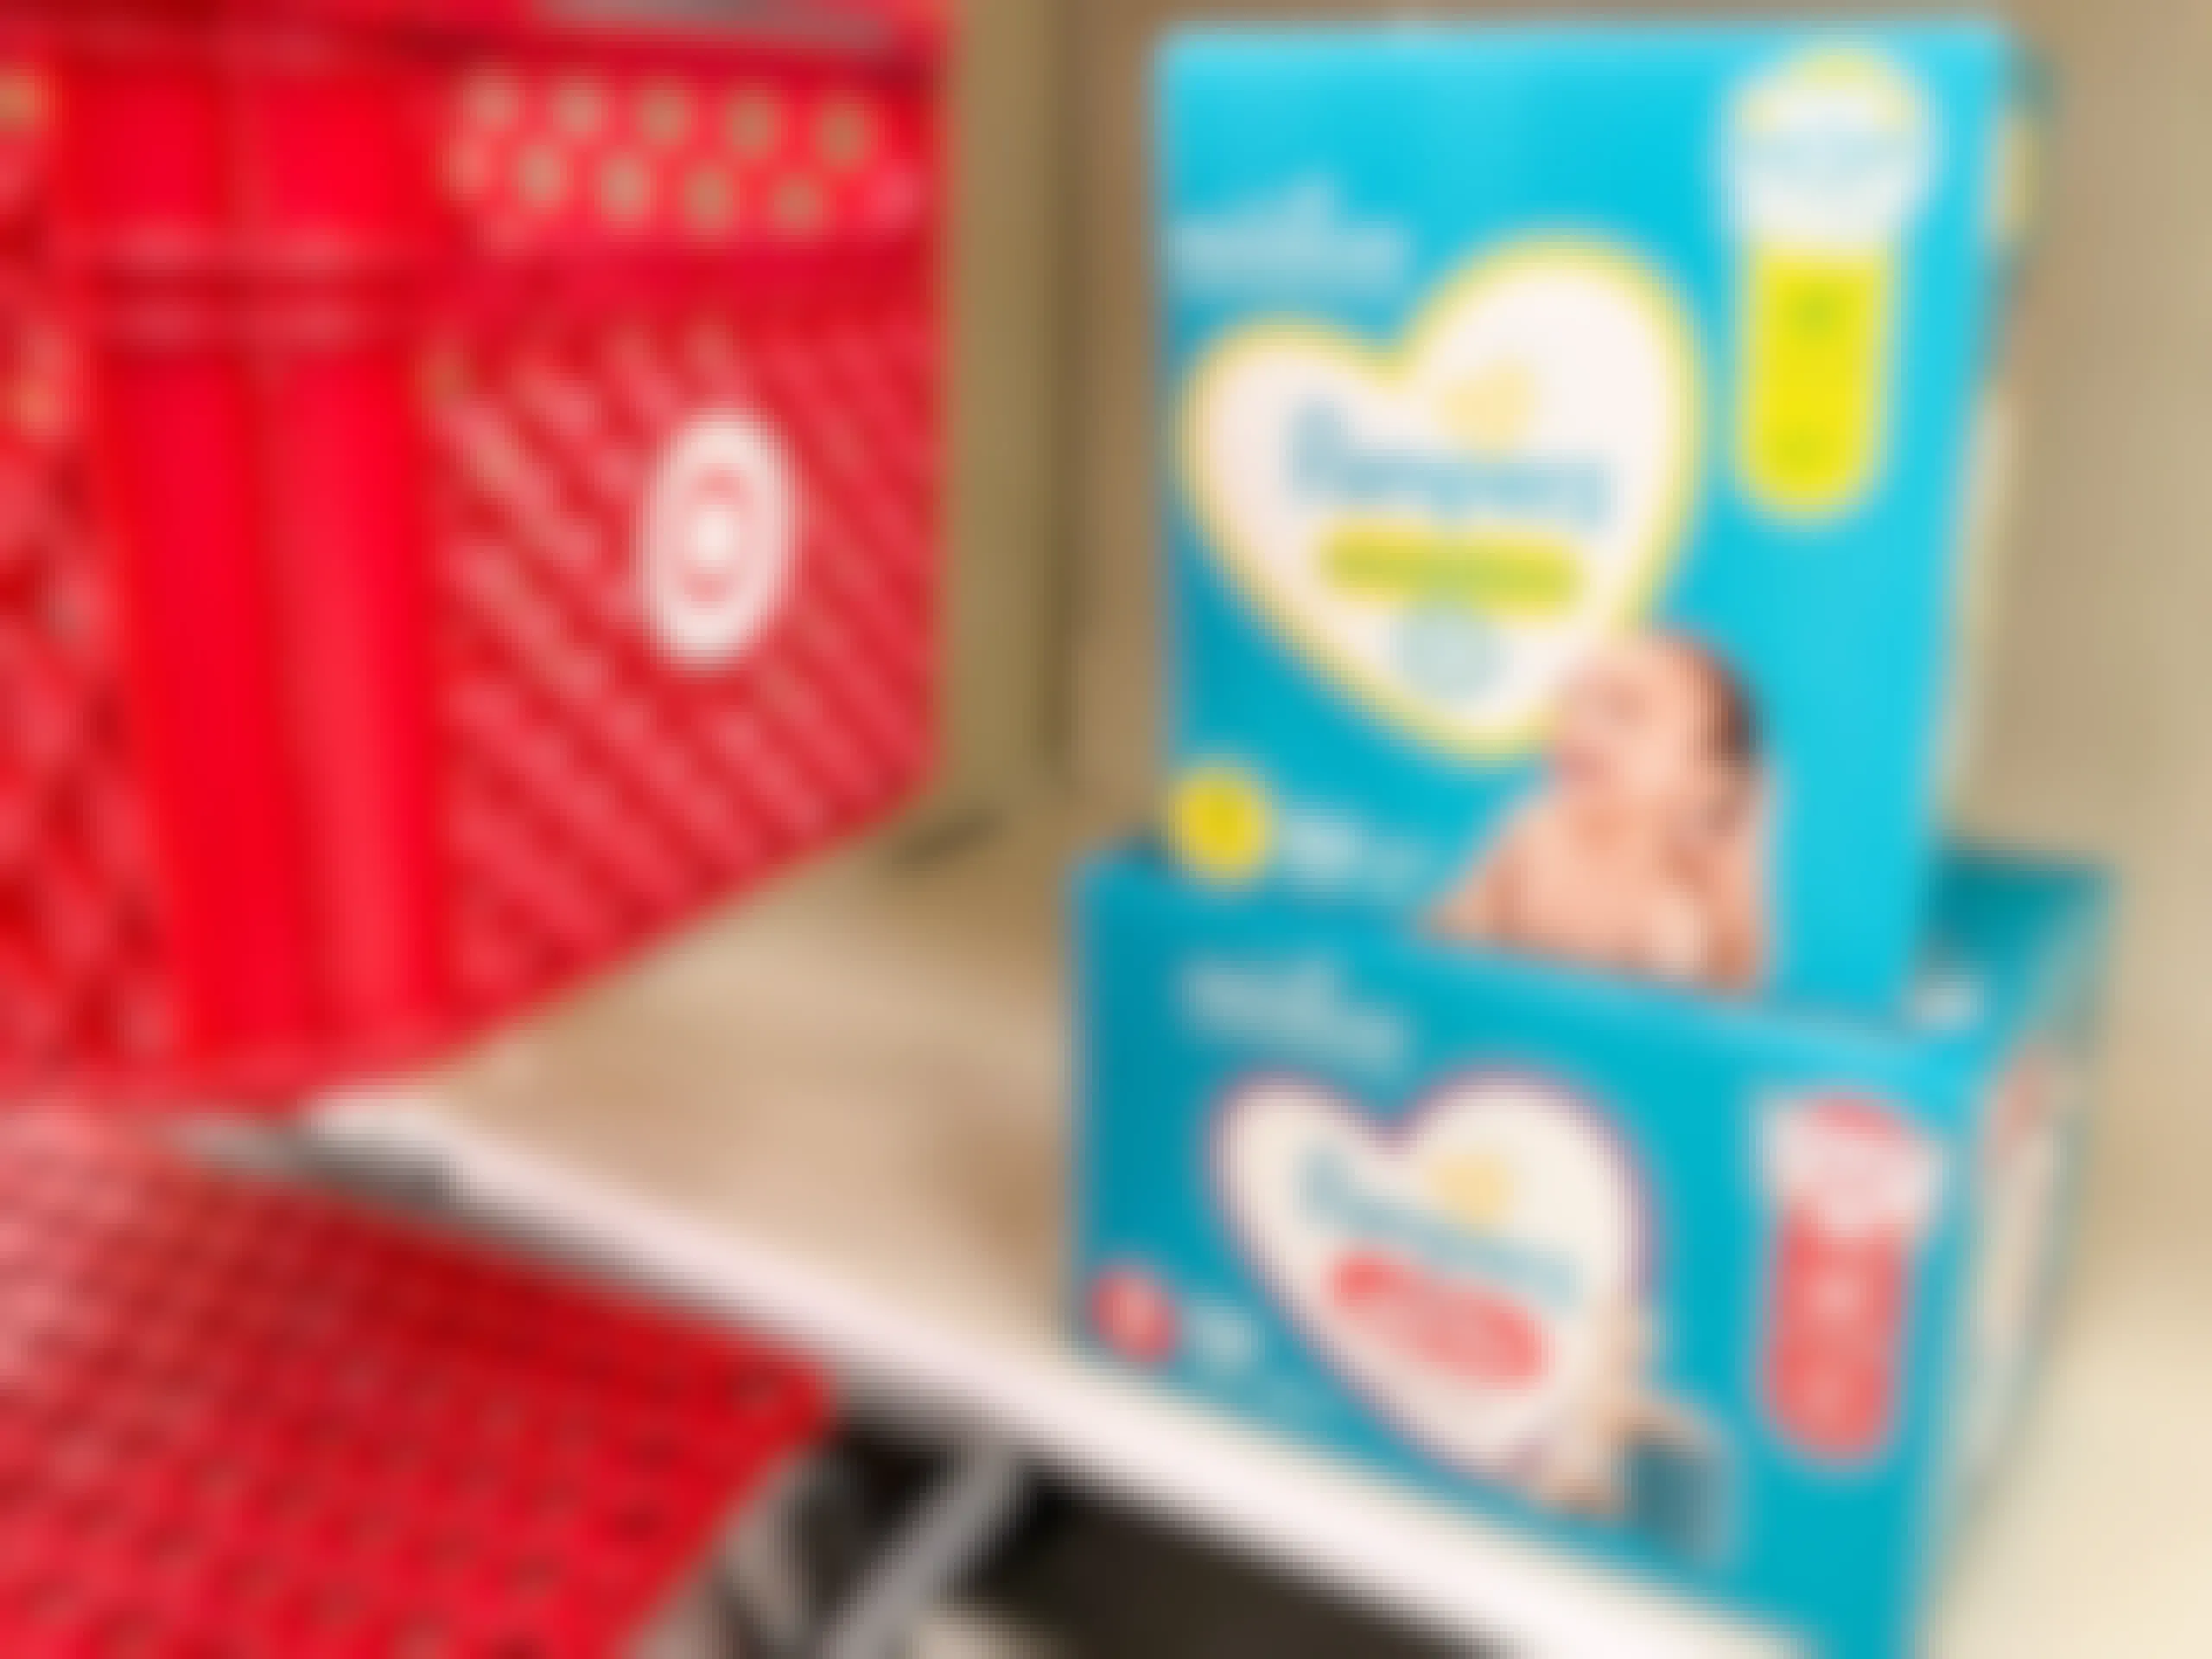 Two boxes of Pampers diapers on store shelf next to Target shopping cart